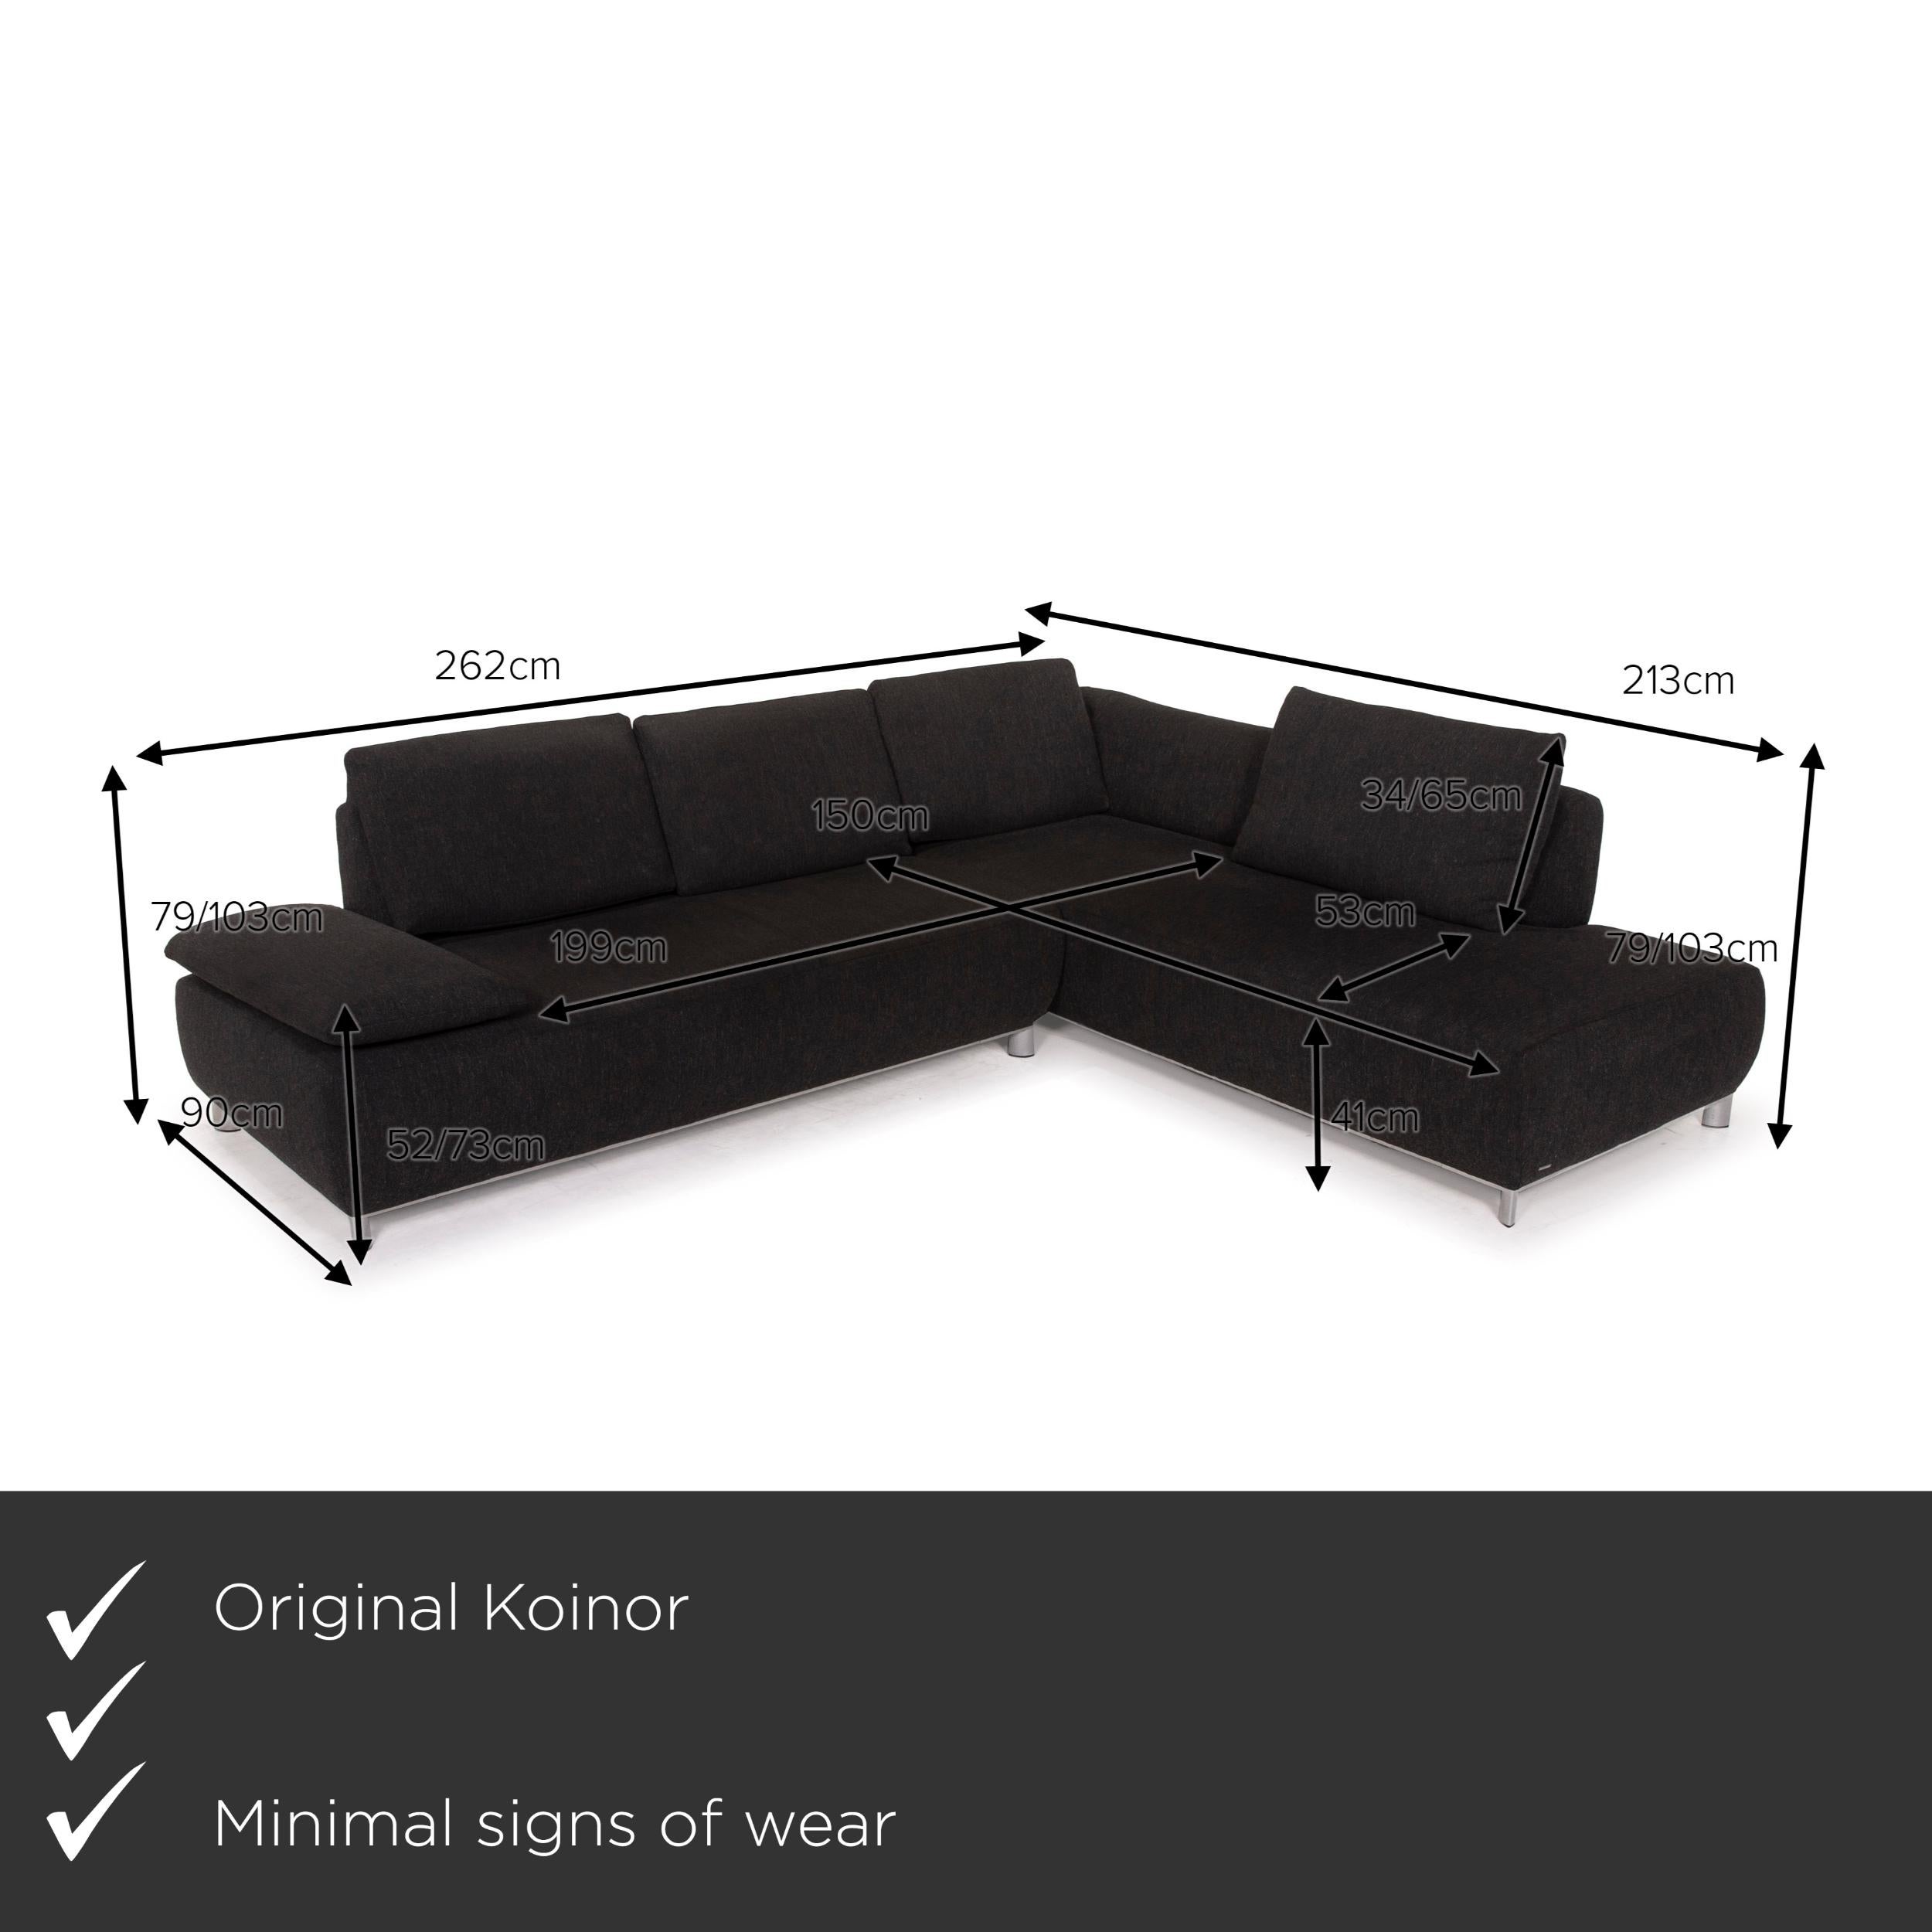 We present to you a Koinor Volare fabric sofa gray corner function.


 Product measurements in centimeters:
 

Depth: 90
Width: 262
Height: 79
Seat height: 41
Rest height: 52
Seat depth: 53
Seat width: 199
Back height: 34.
 